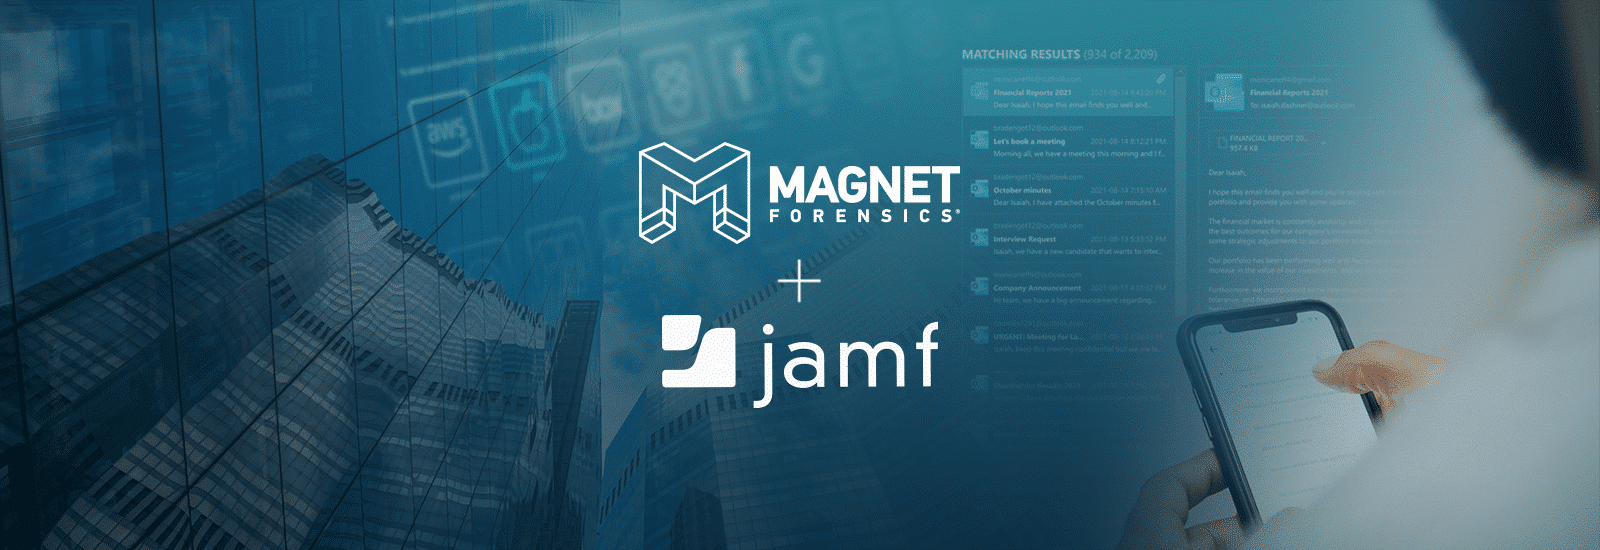 A decorative header for the Magnet Forensics and Jamf Partnership blog